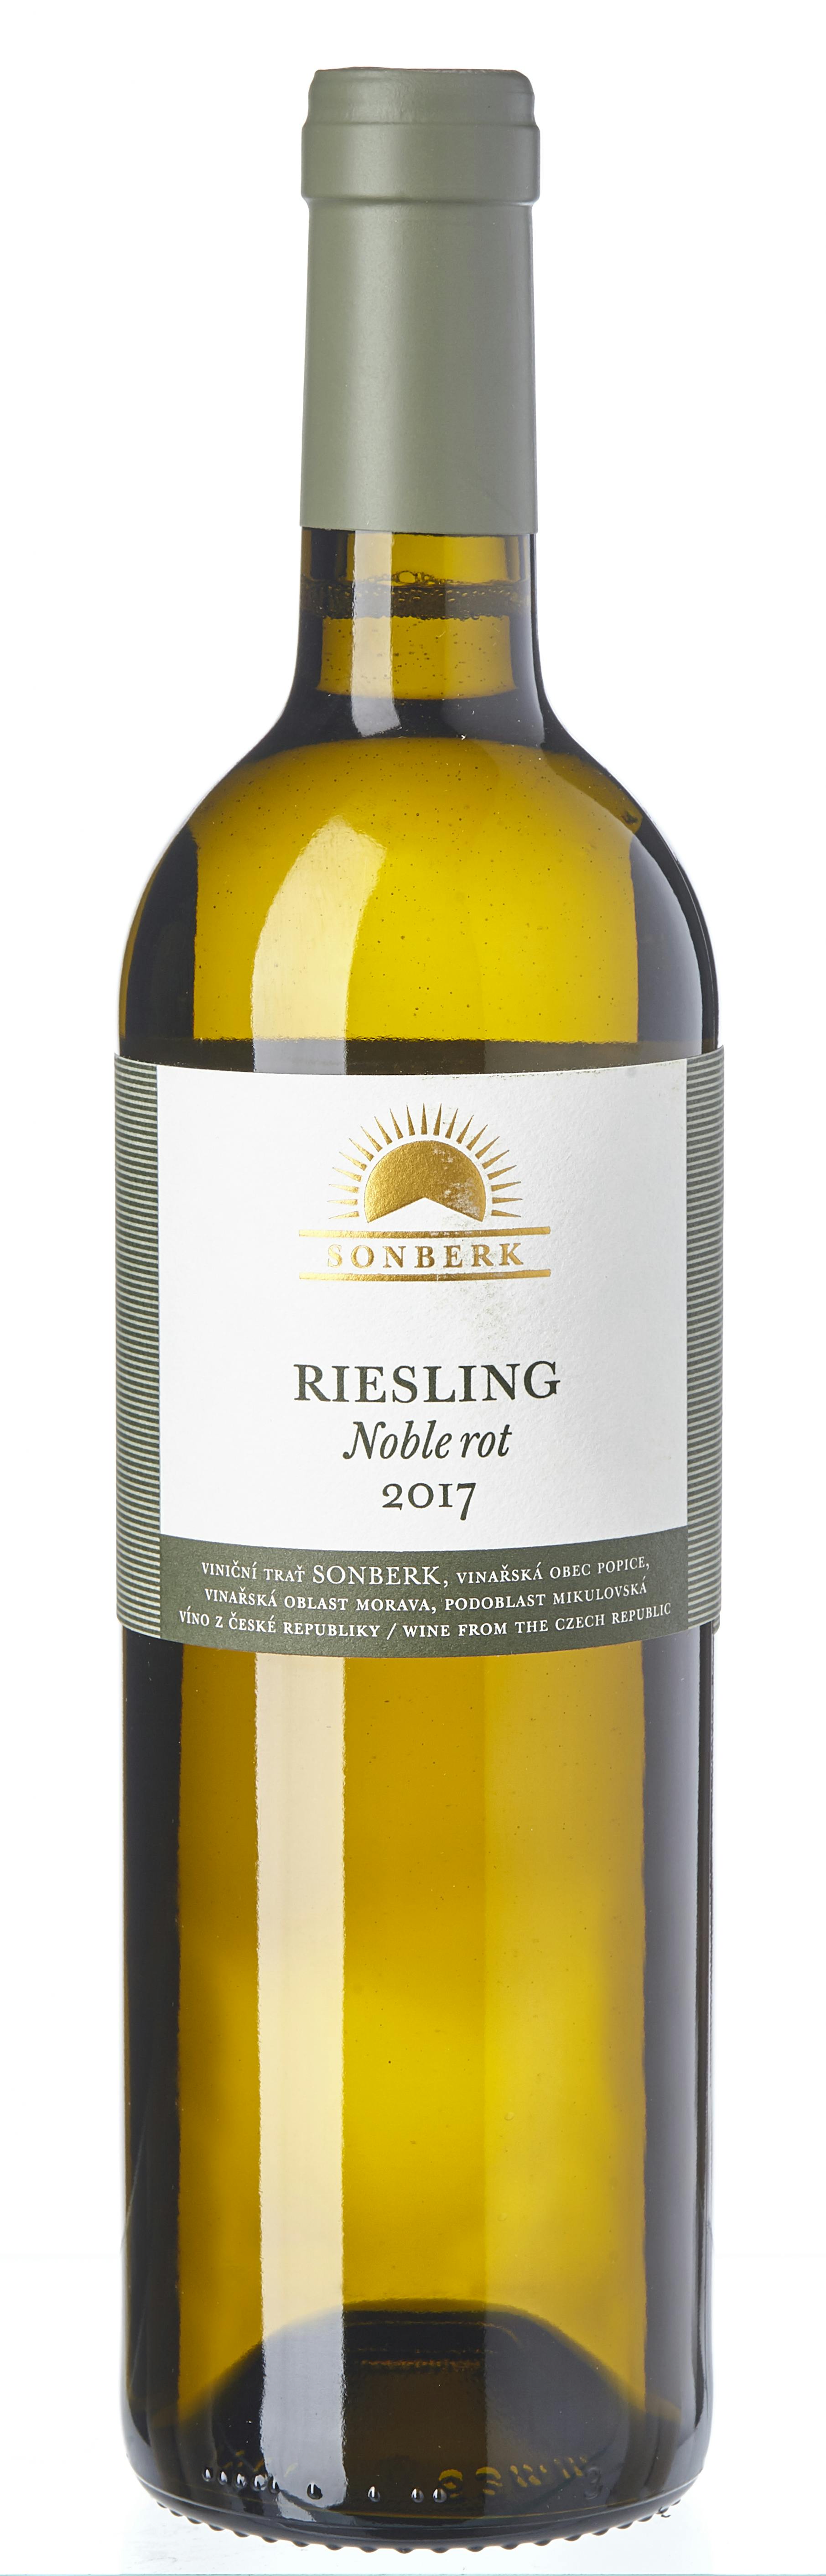 Riesling Noble Rot 2017